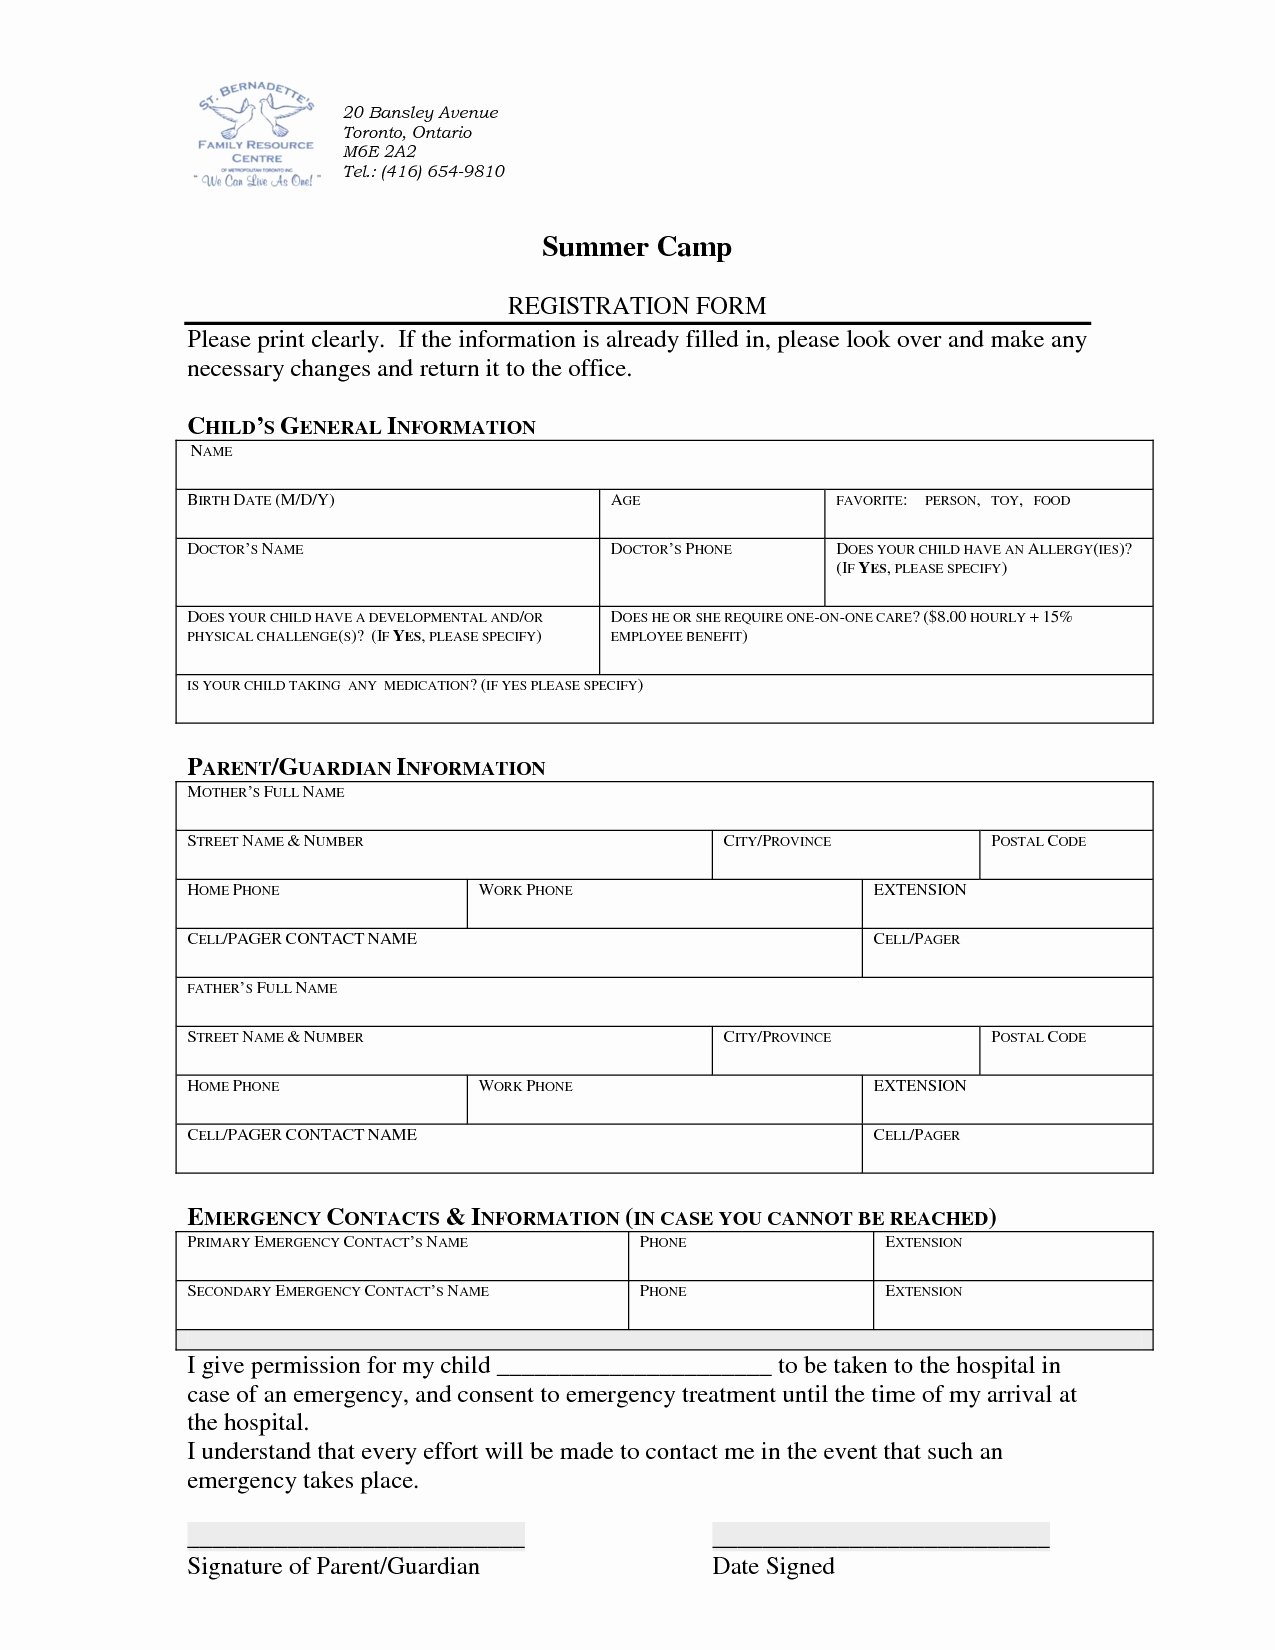 Camp Registration form Template Word Beautiful Index Of Cdn 3 2004 217